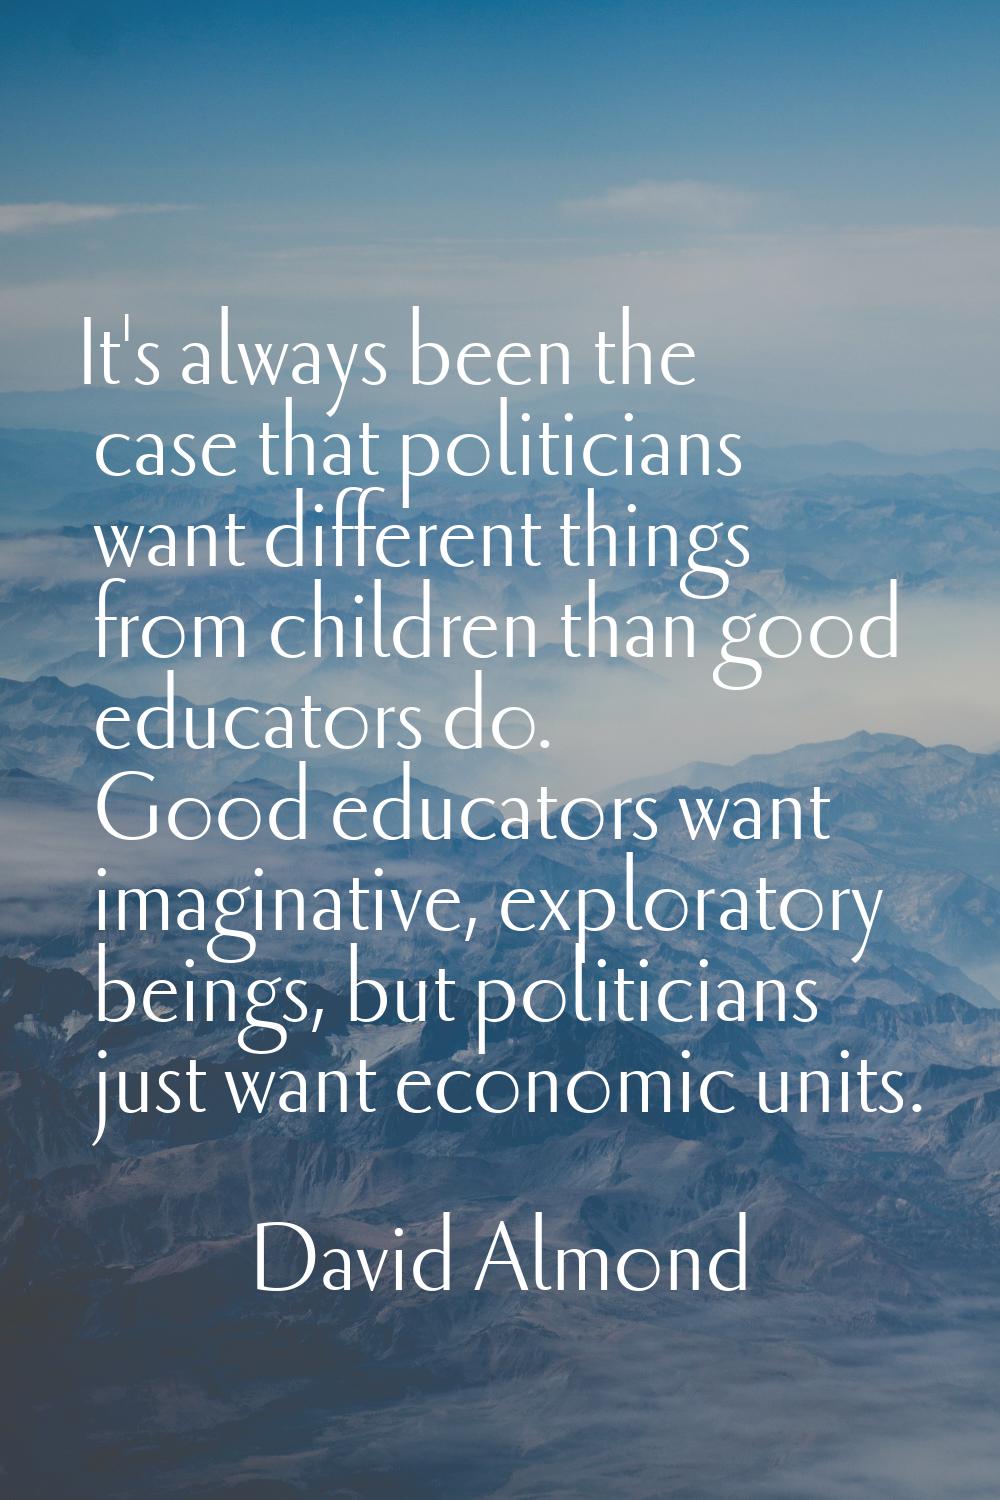 It's always been the case that politicians want different things from children than good educators 